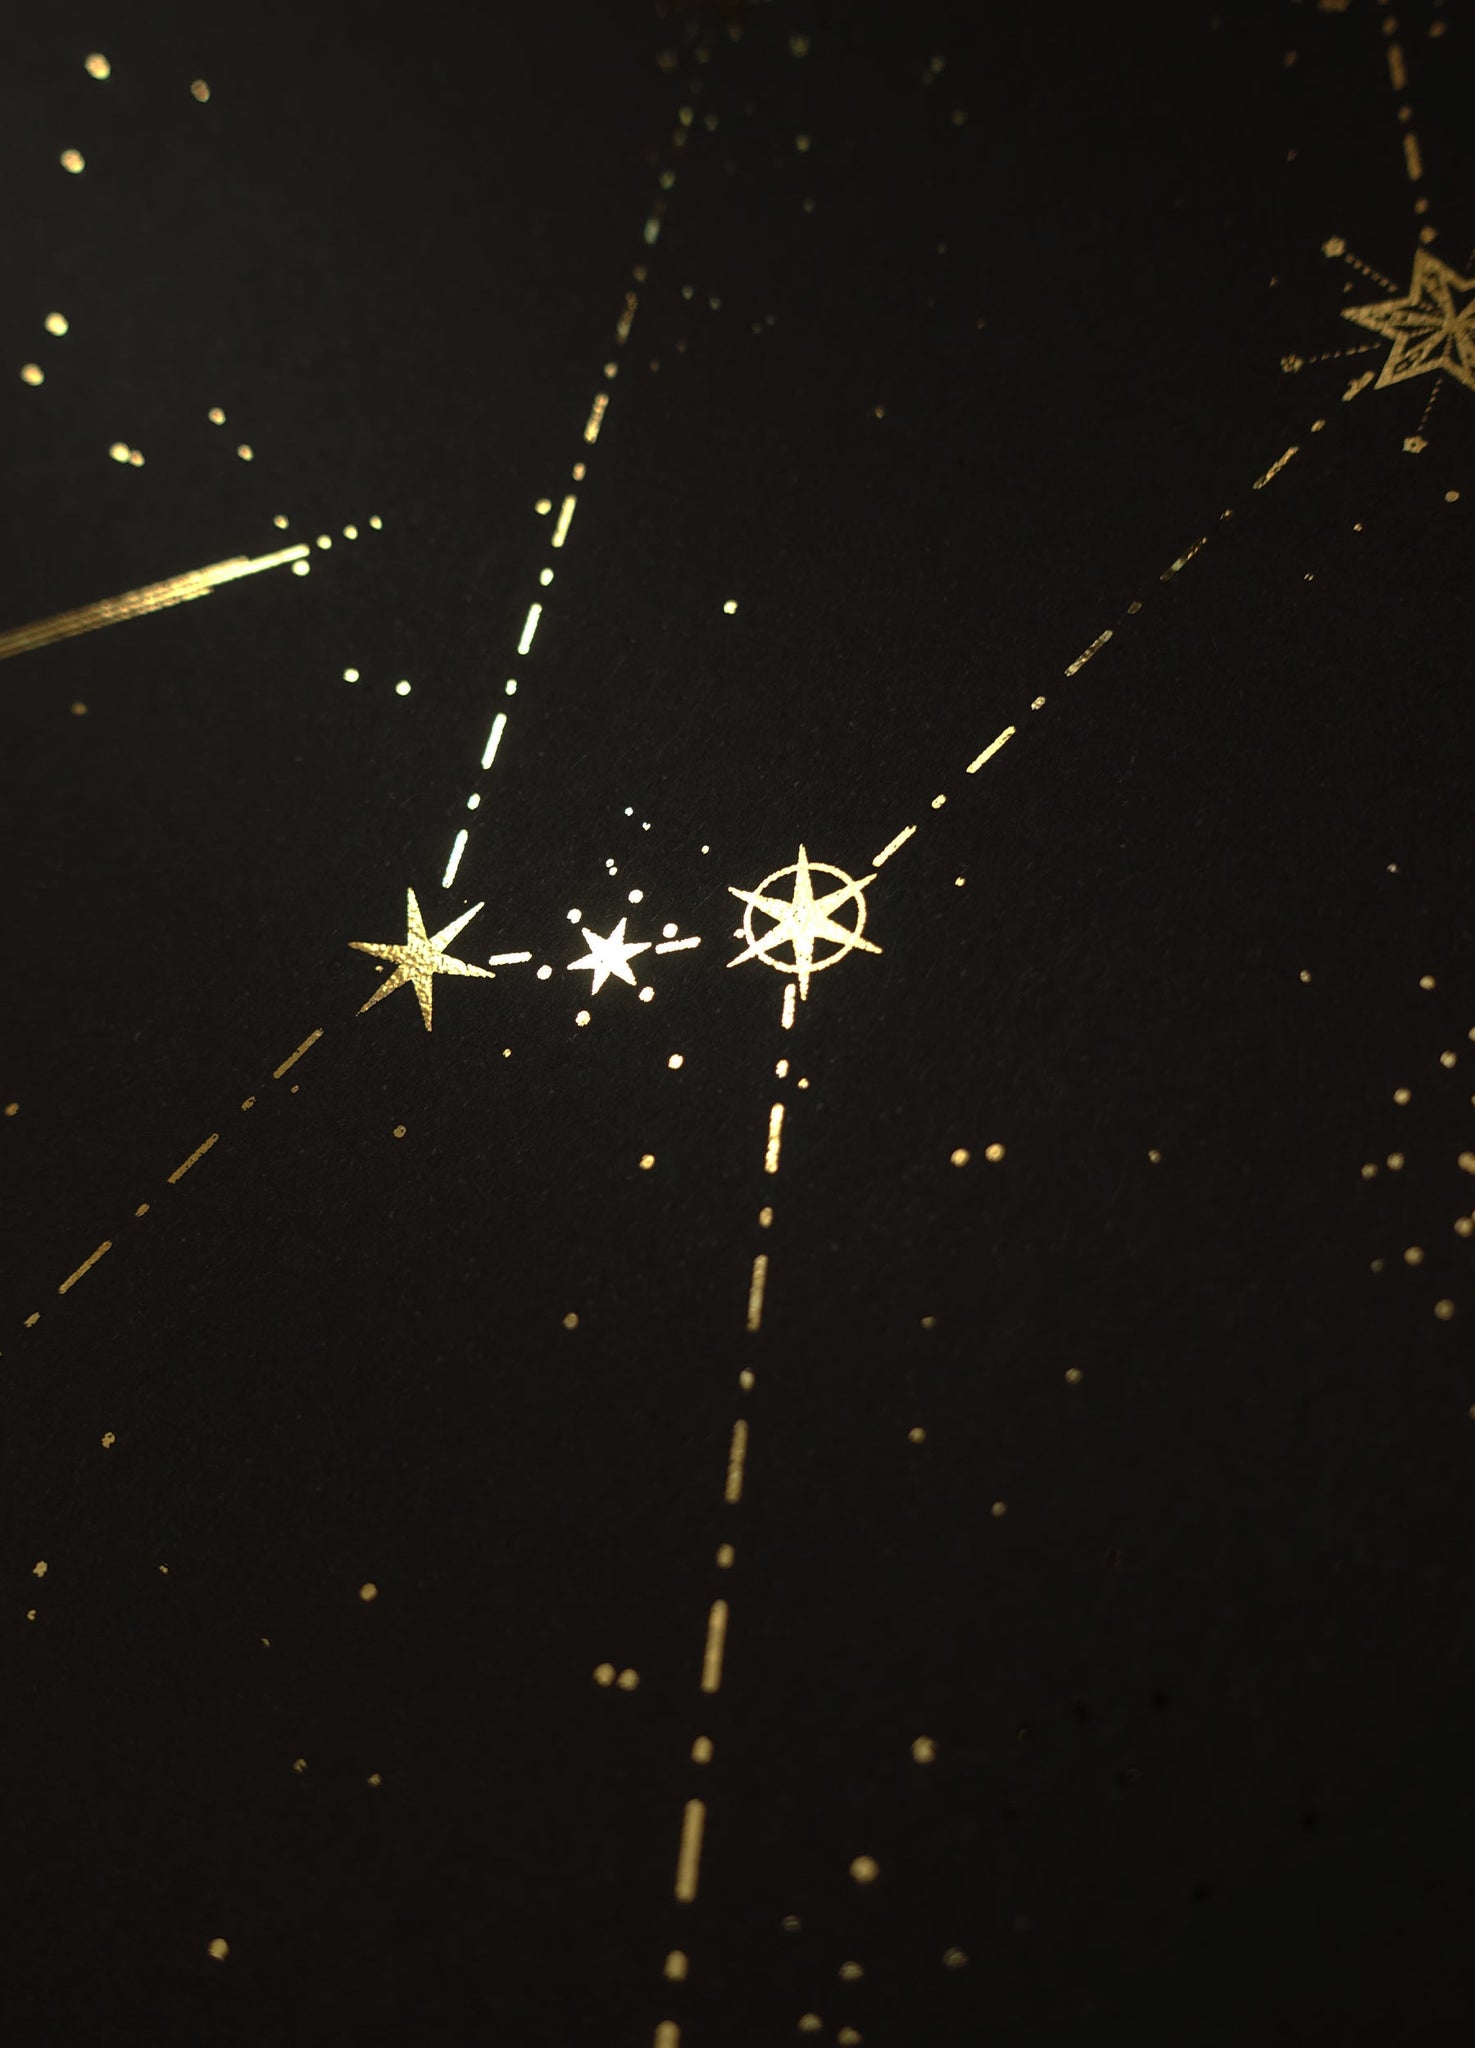 Orion Constellation gold foil print by Cocorrina & co studio